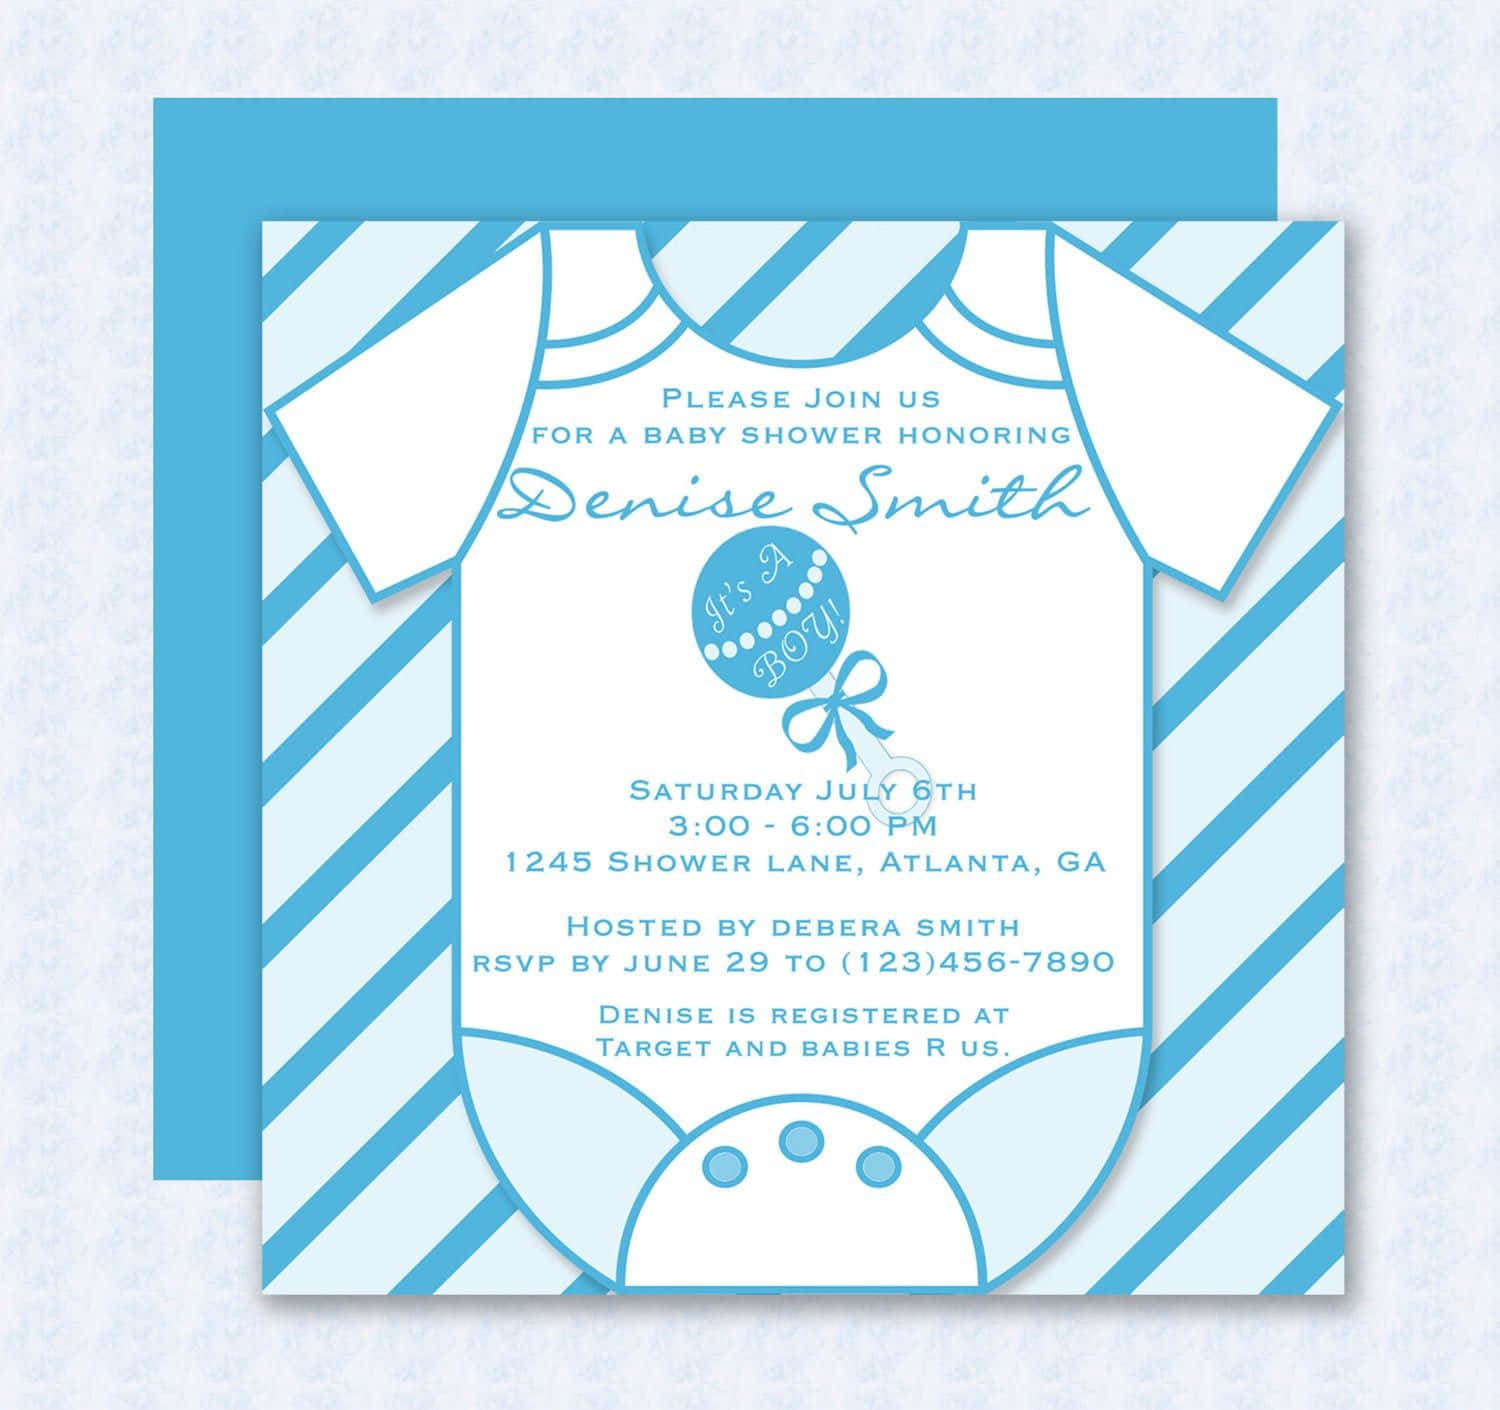 Celebrate the arrival of a new baby with an adorable Baby Shower!